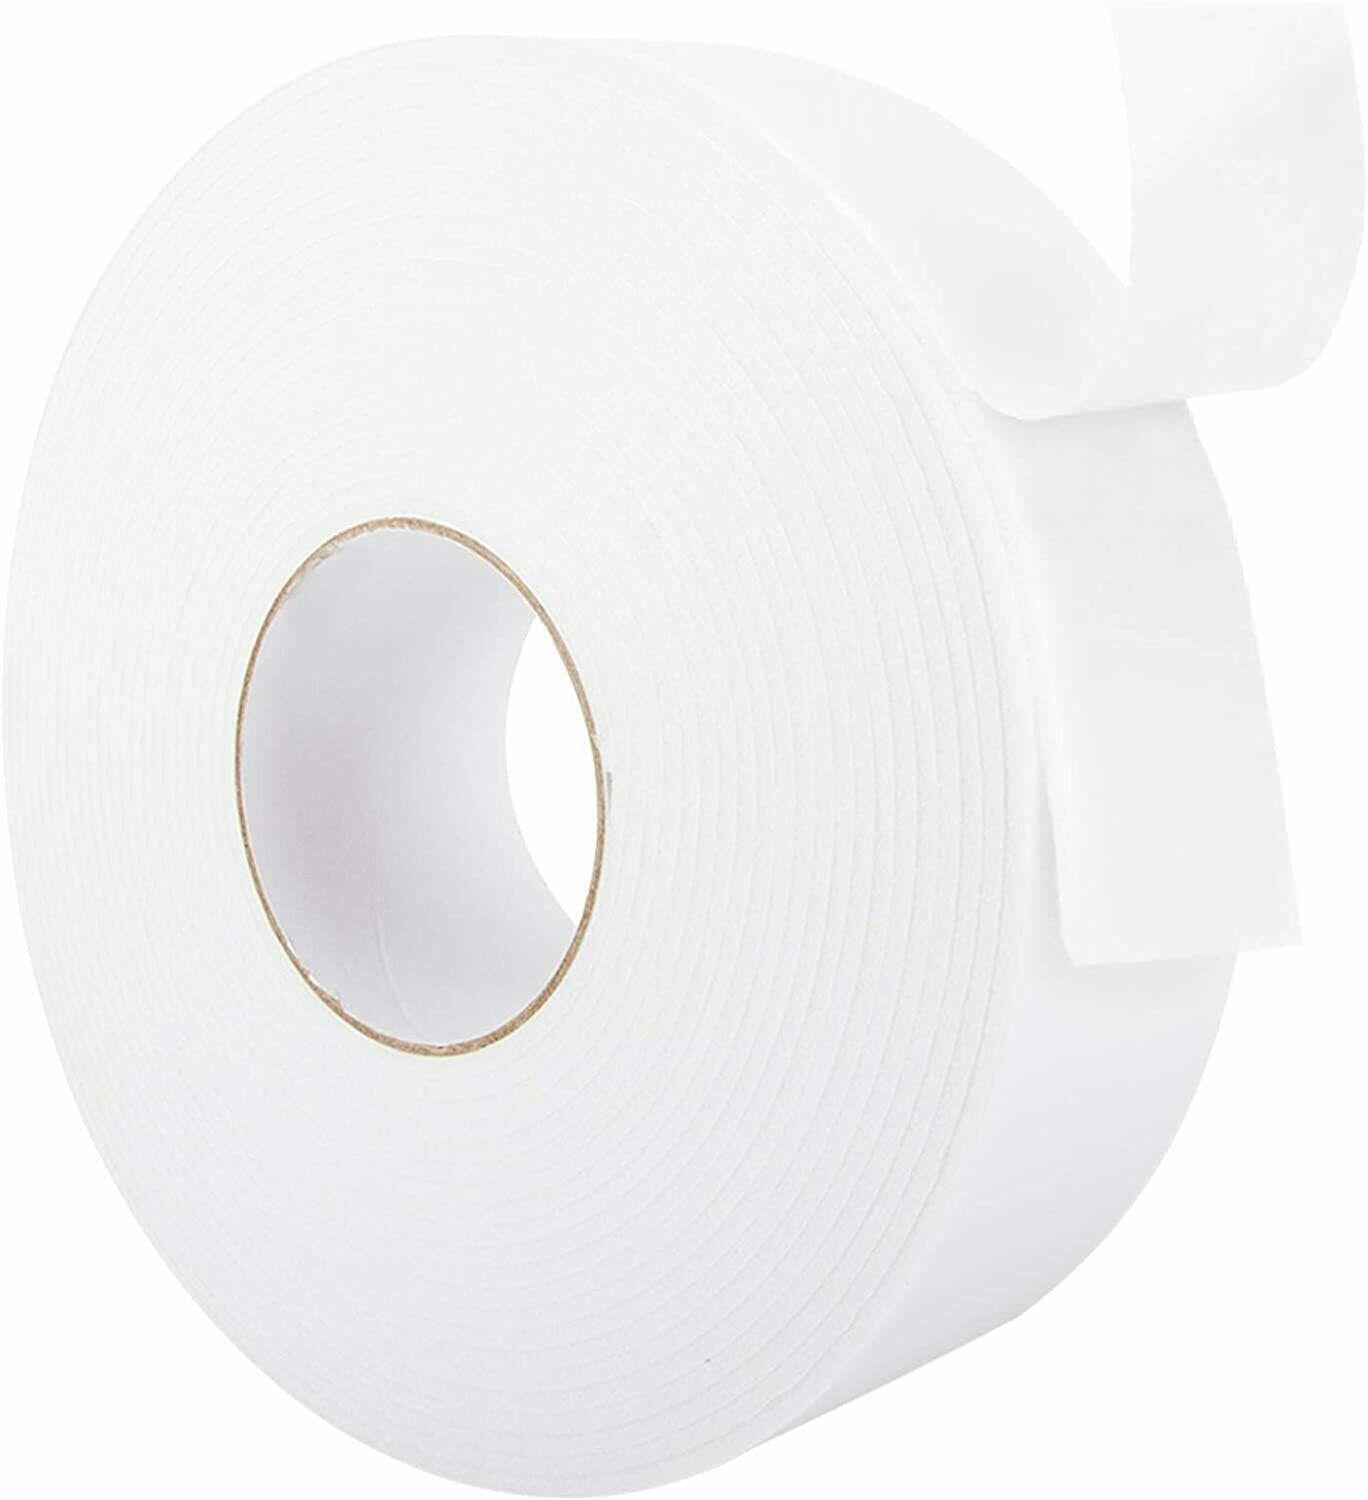 HEAVY DUTY EXTRA STRONG X LARGE DOUBLE SIDED STICKY TAPE FOAM ADHESIVE PADDED 5M